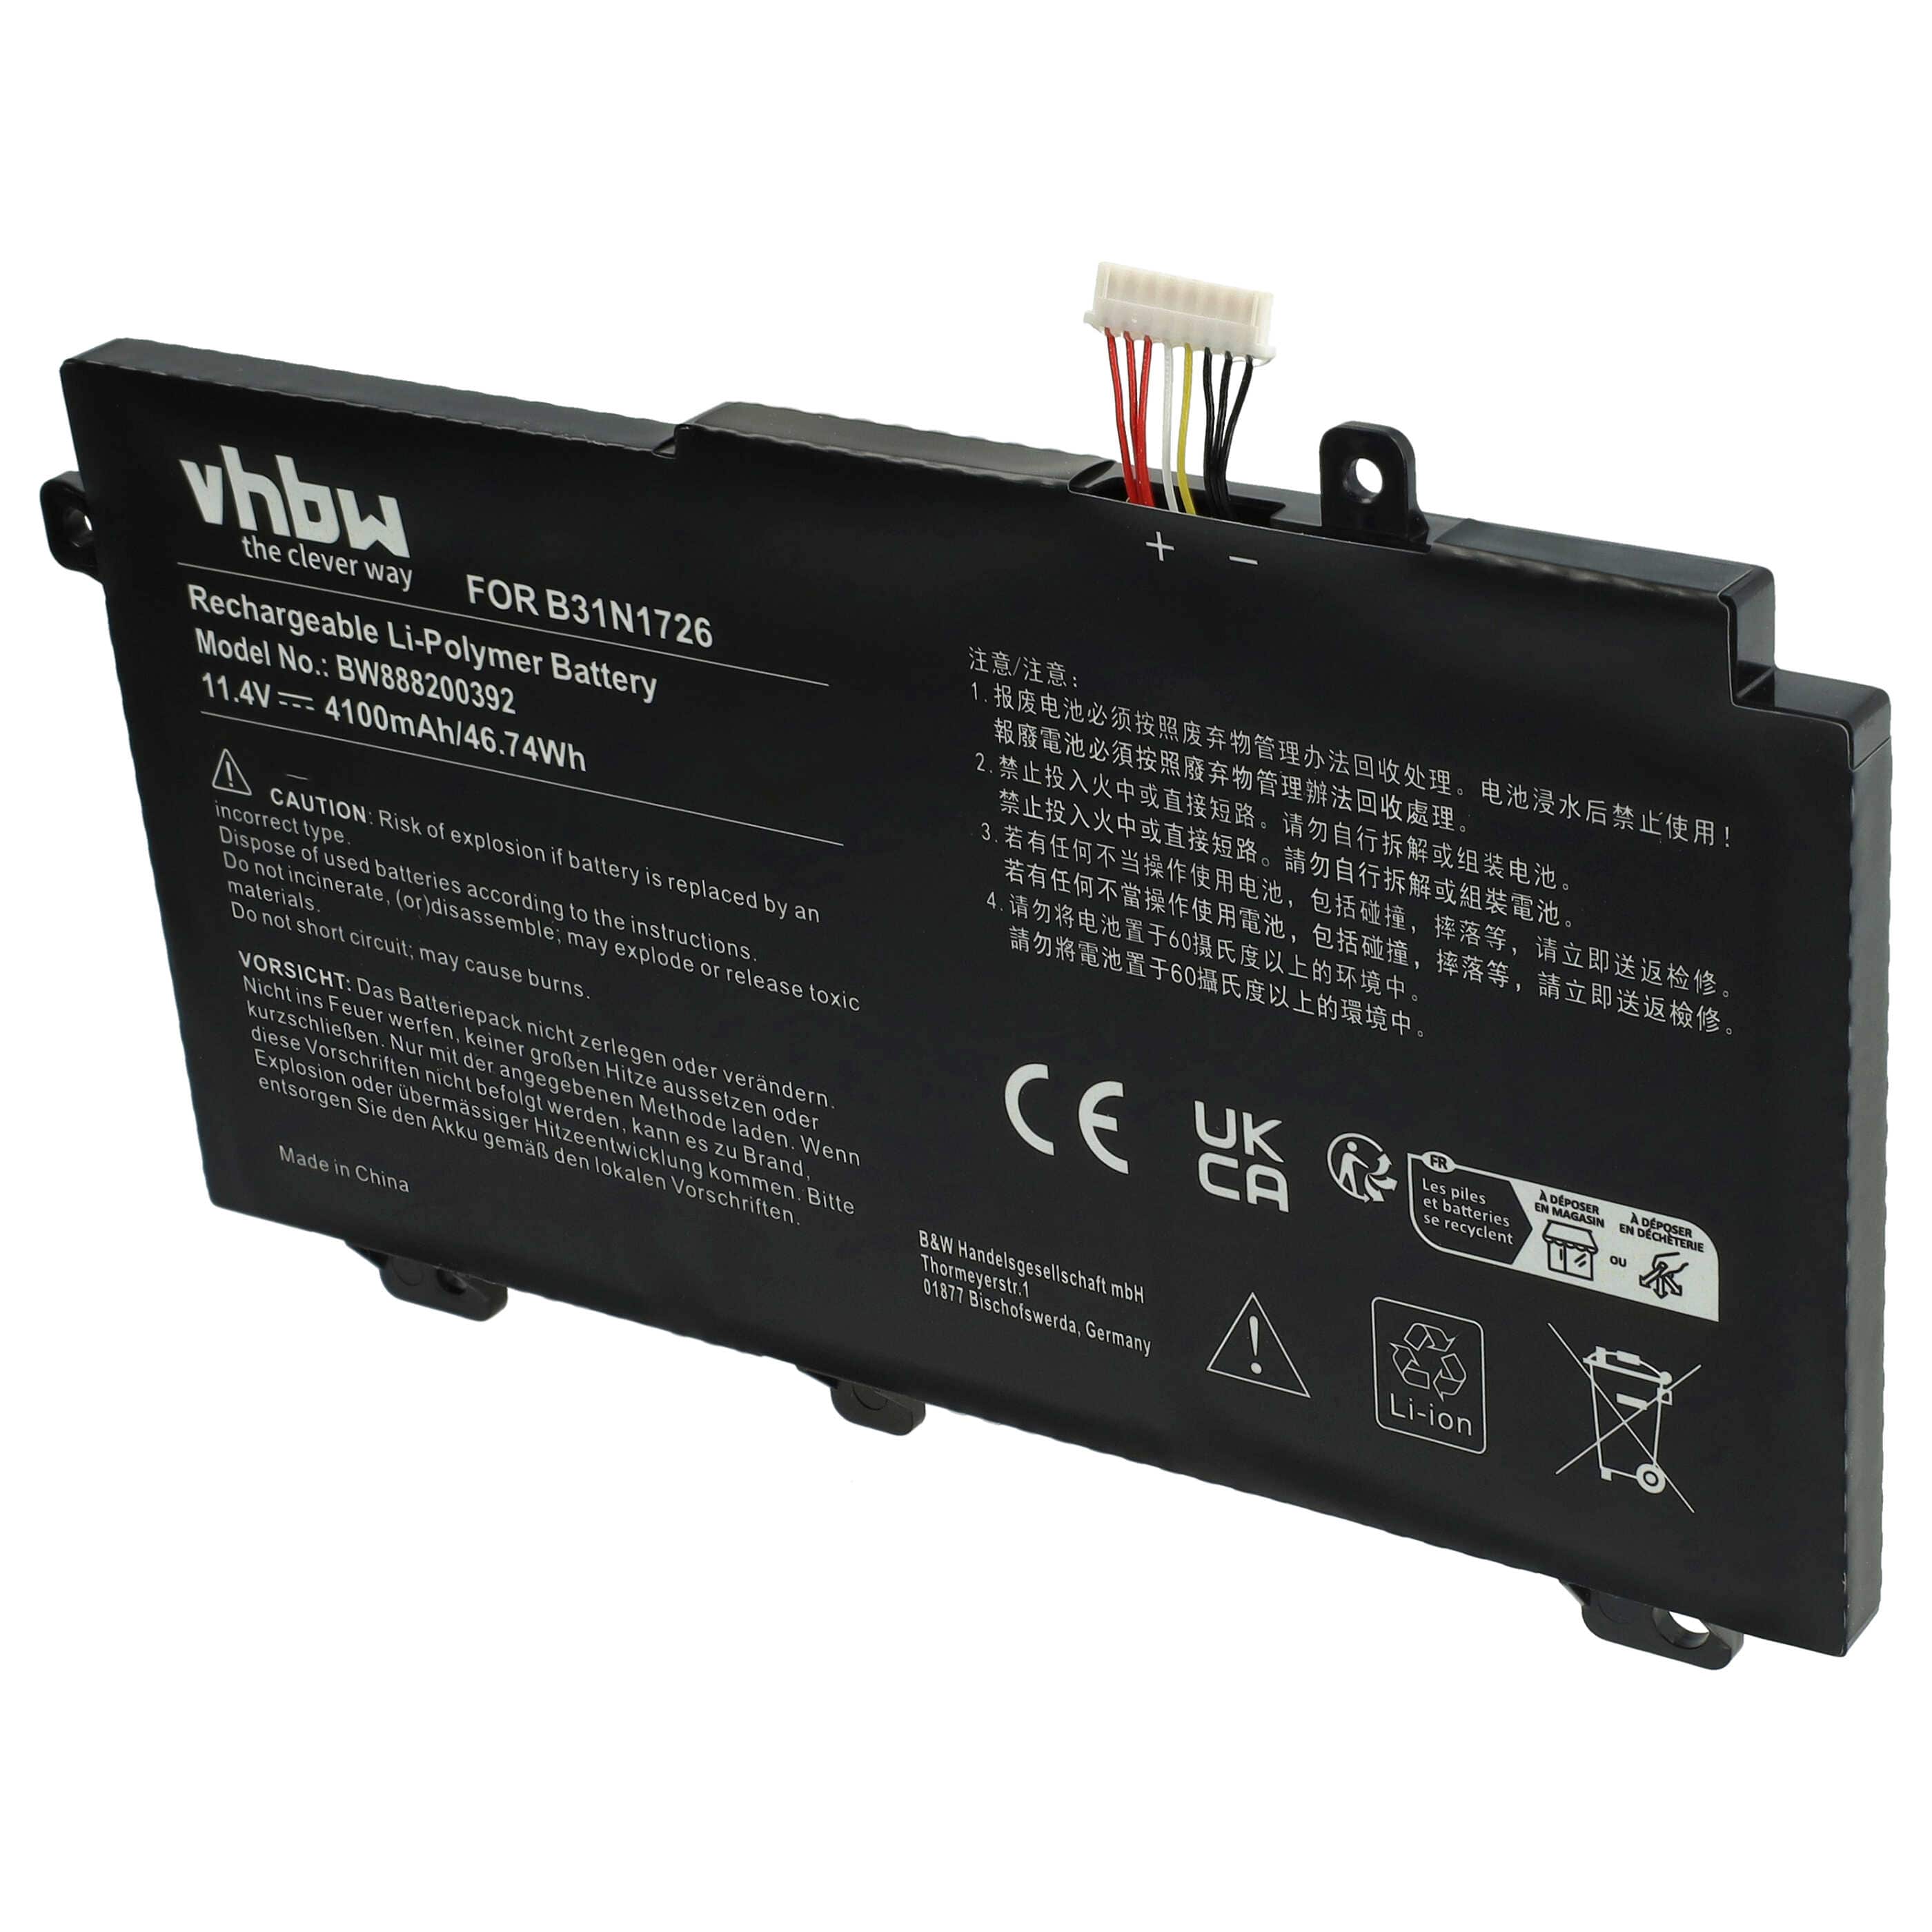 Notebook Battery Replacement for Asus A41LK9H, 3ICP7/60/80, 0B200-02910000 - 4100mAh 11.1V Li-polymer, black